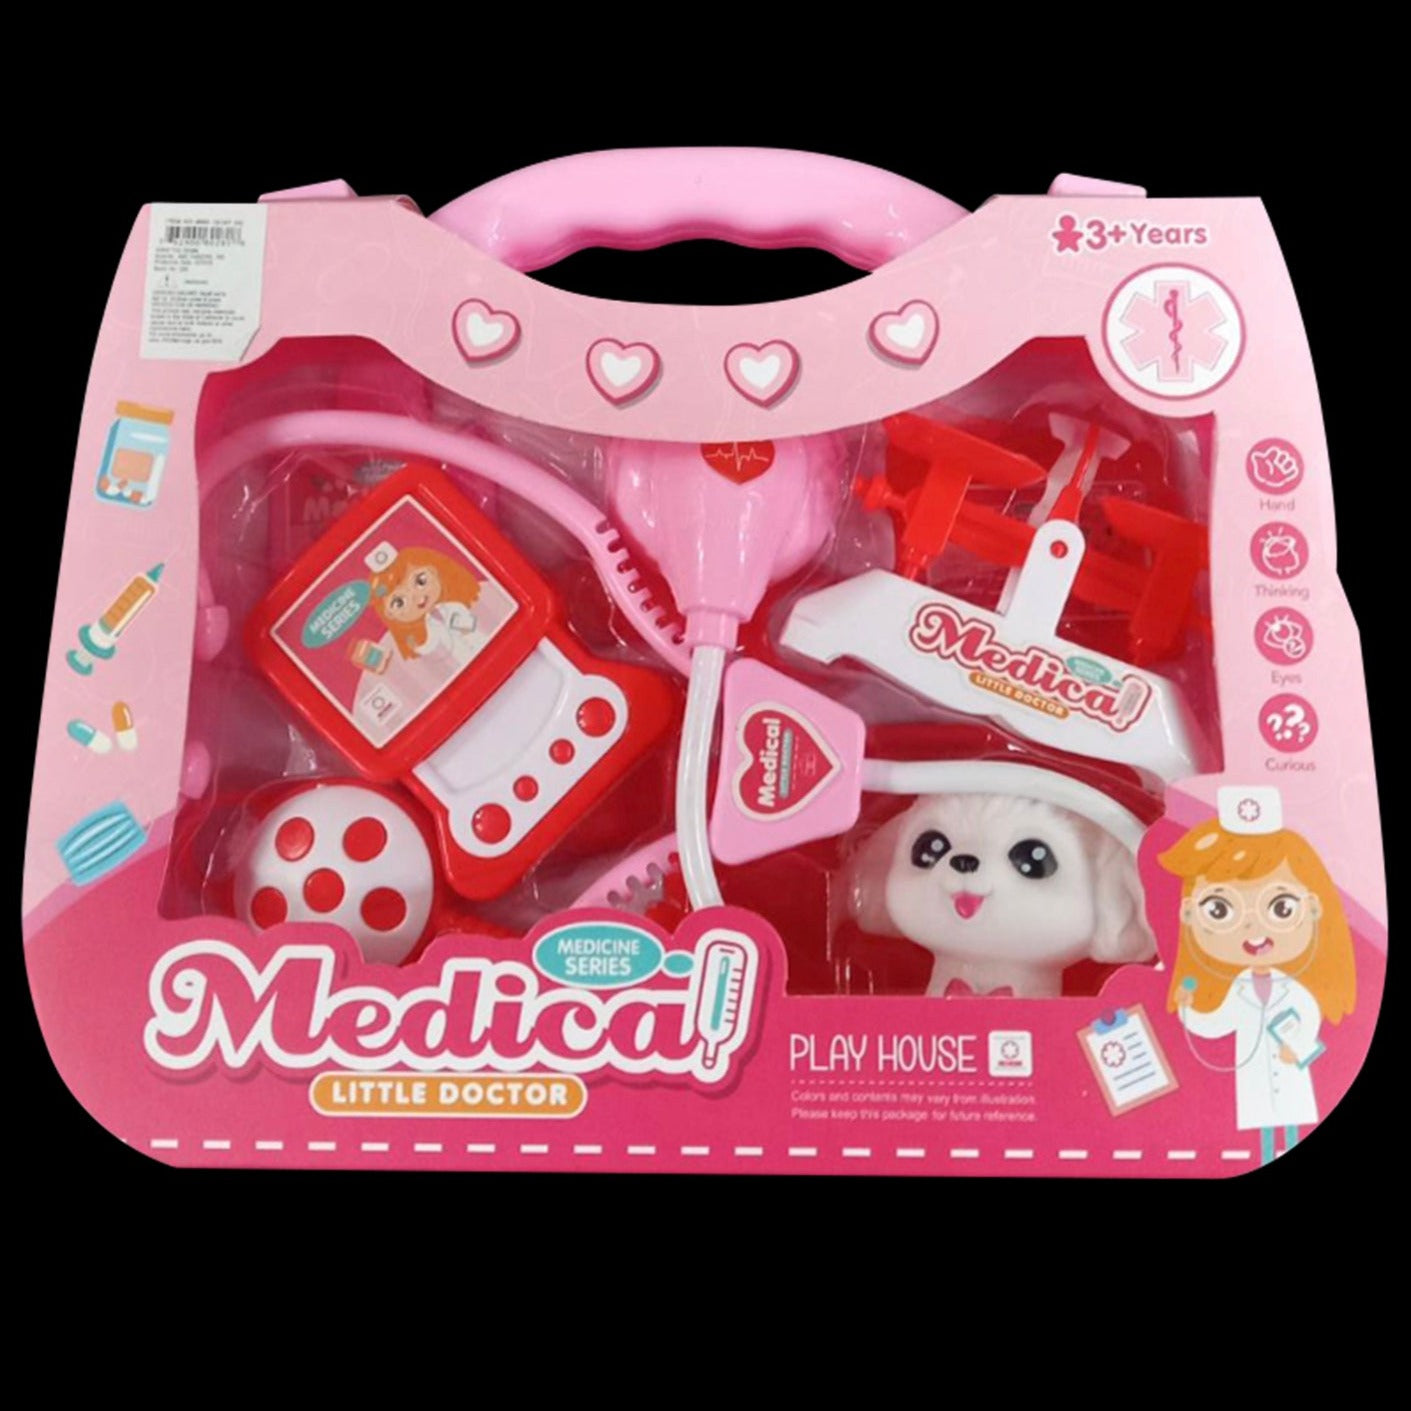 Medical Little Doctor Toy Play set